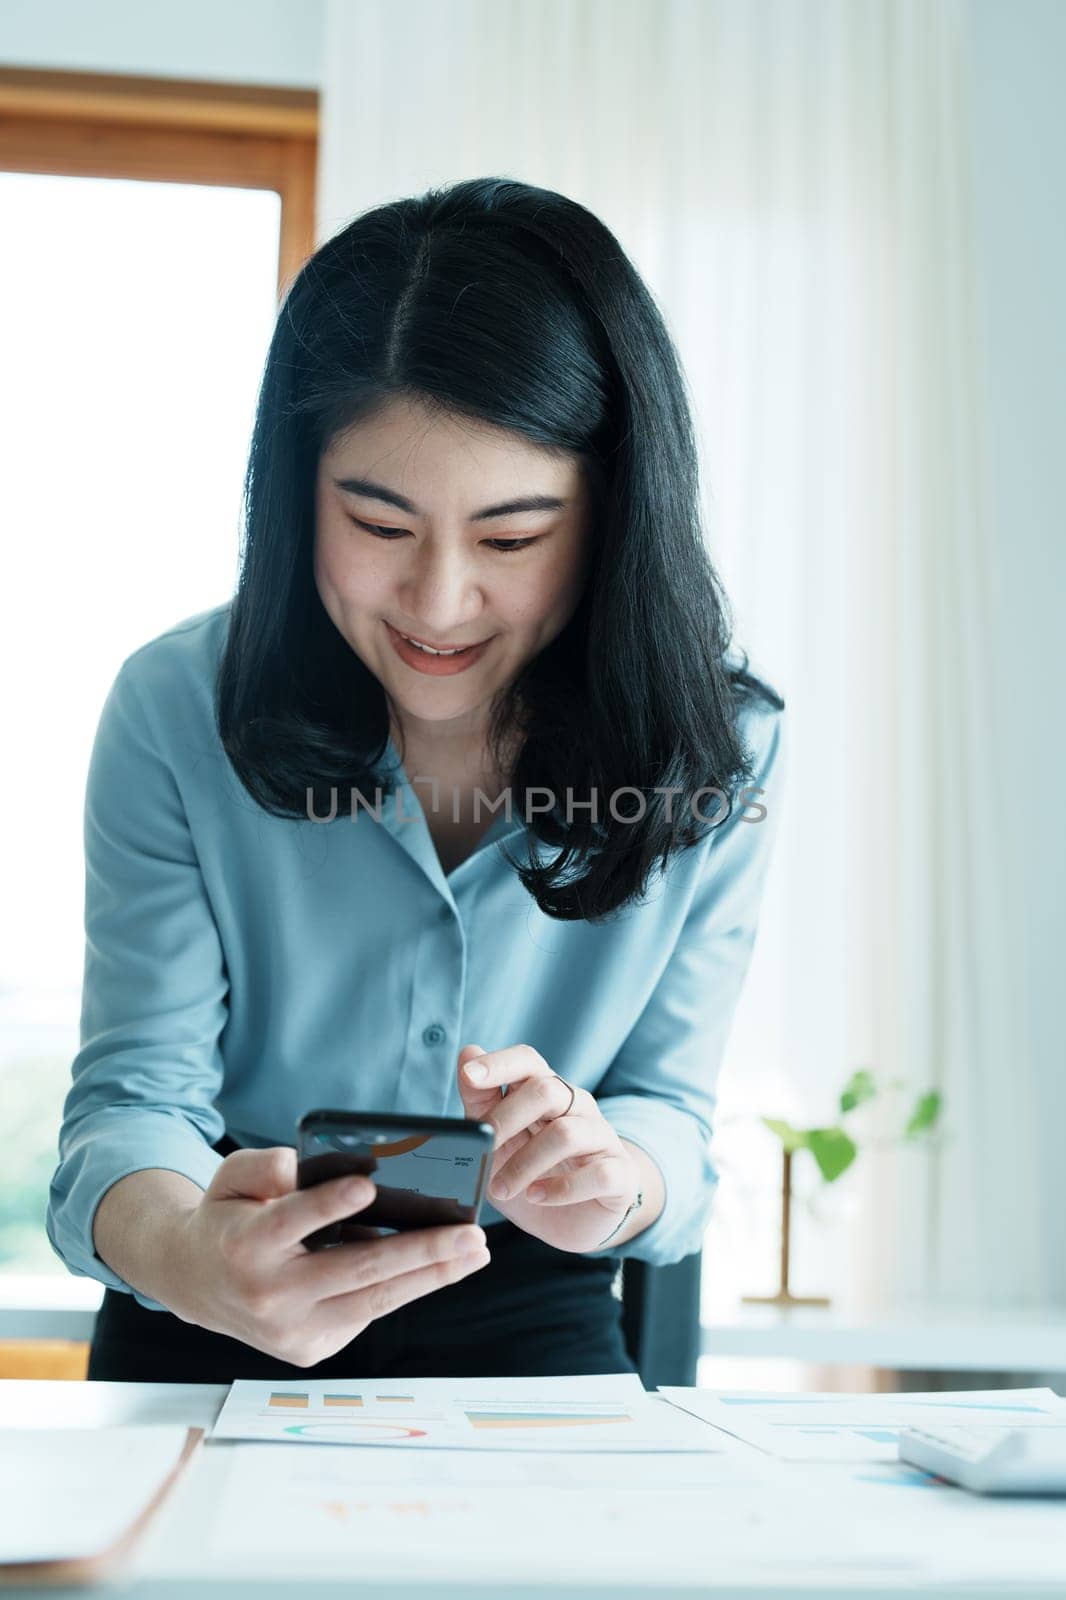 Portrait of a young Asian woman showing a smiling face as she uses her phone, and financial documents on her desk in the early morning hours.